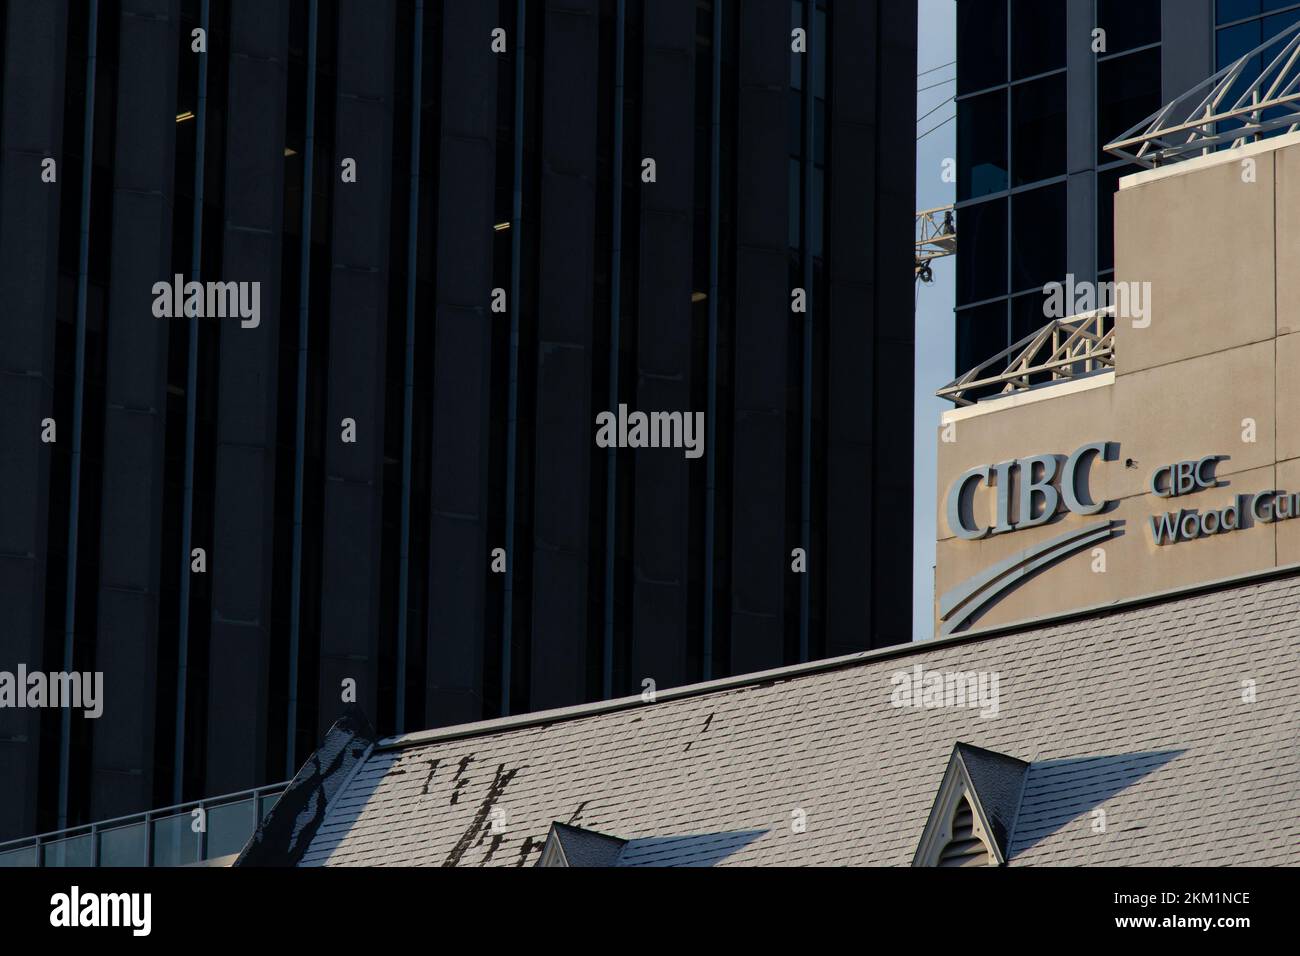 A chrome CIBC, Commerce Imperial Bank of Canada, logo is seen above a large CIBC bank branch and office in downtown Ottawa. Stock Photo